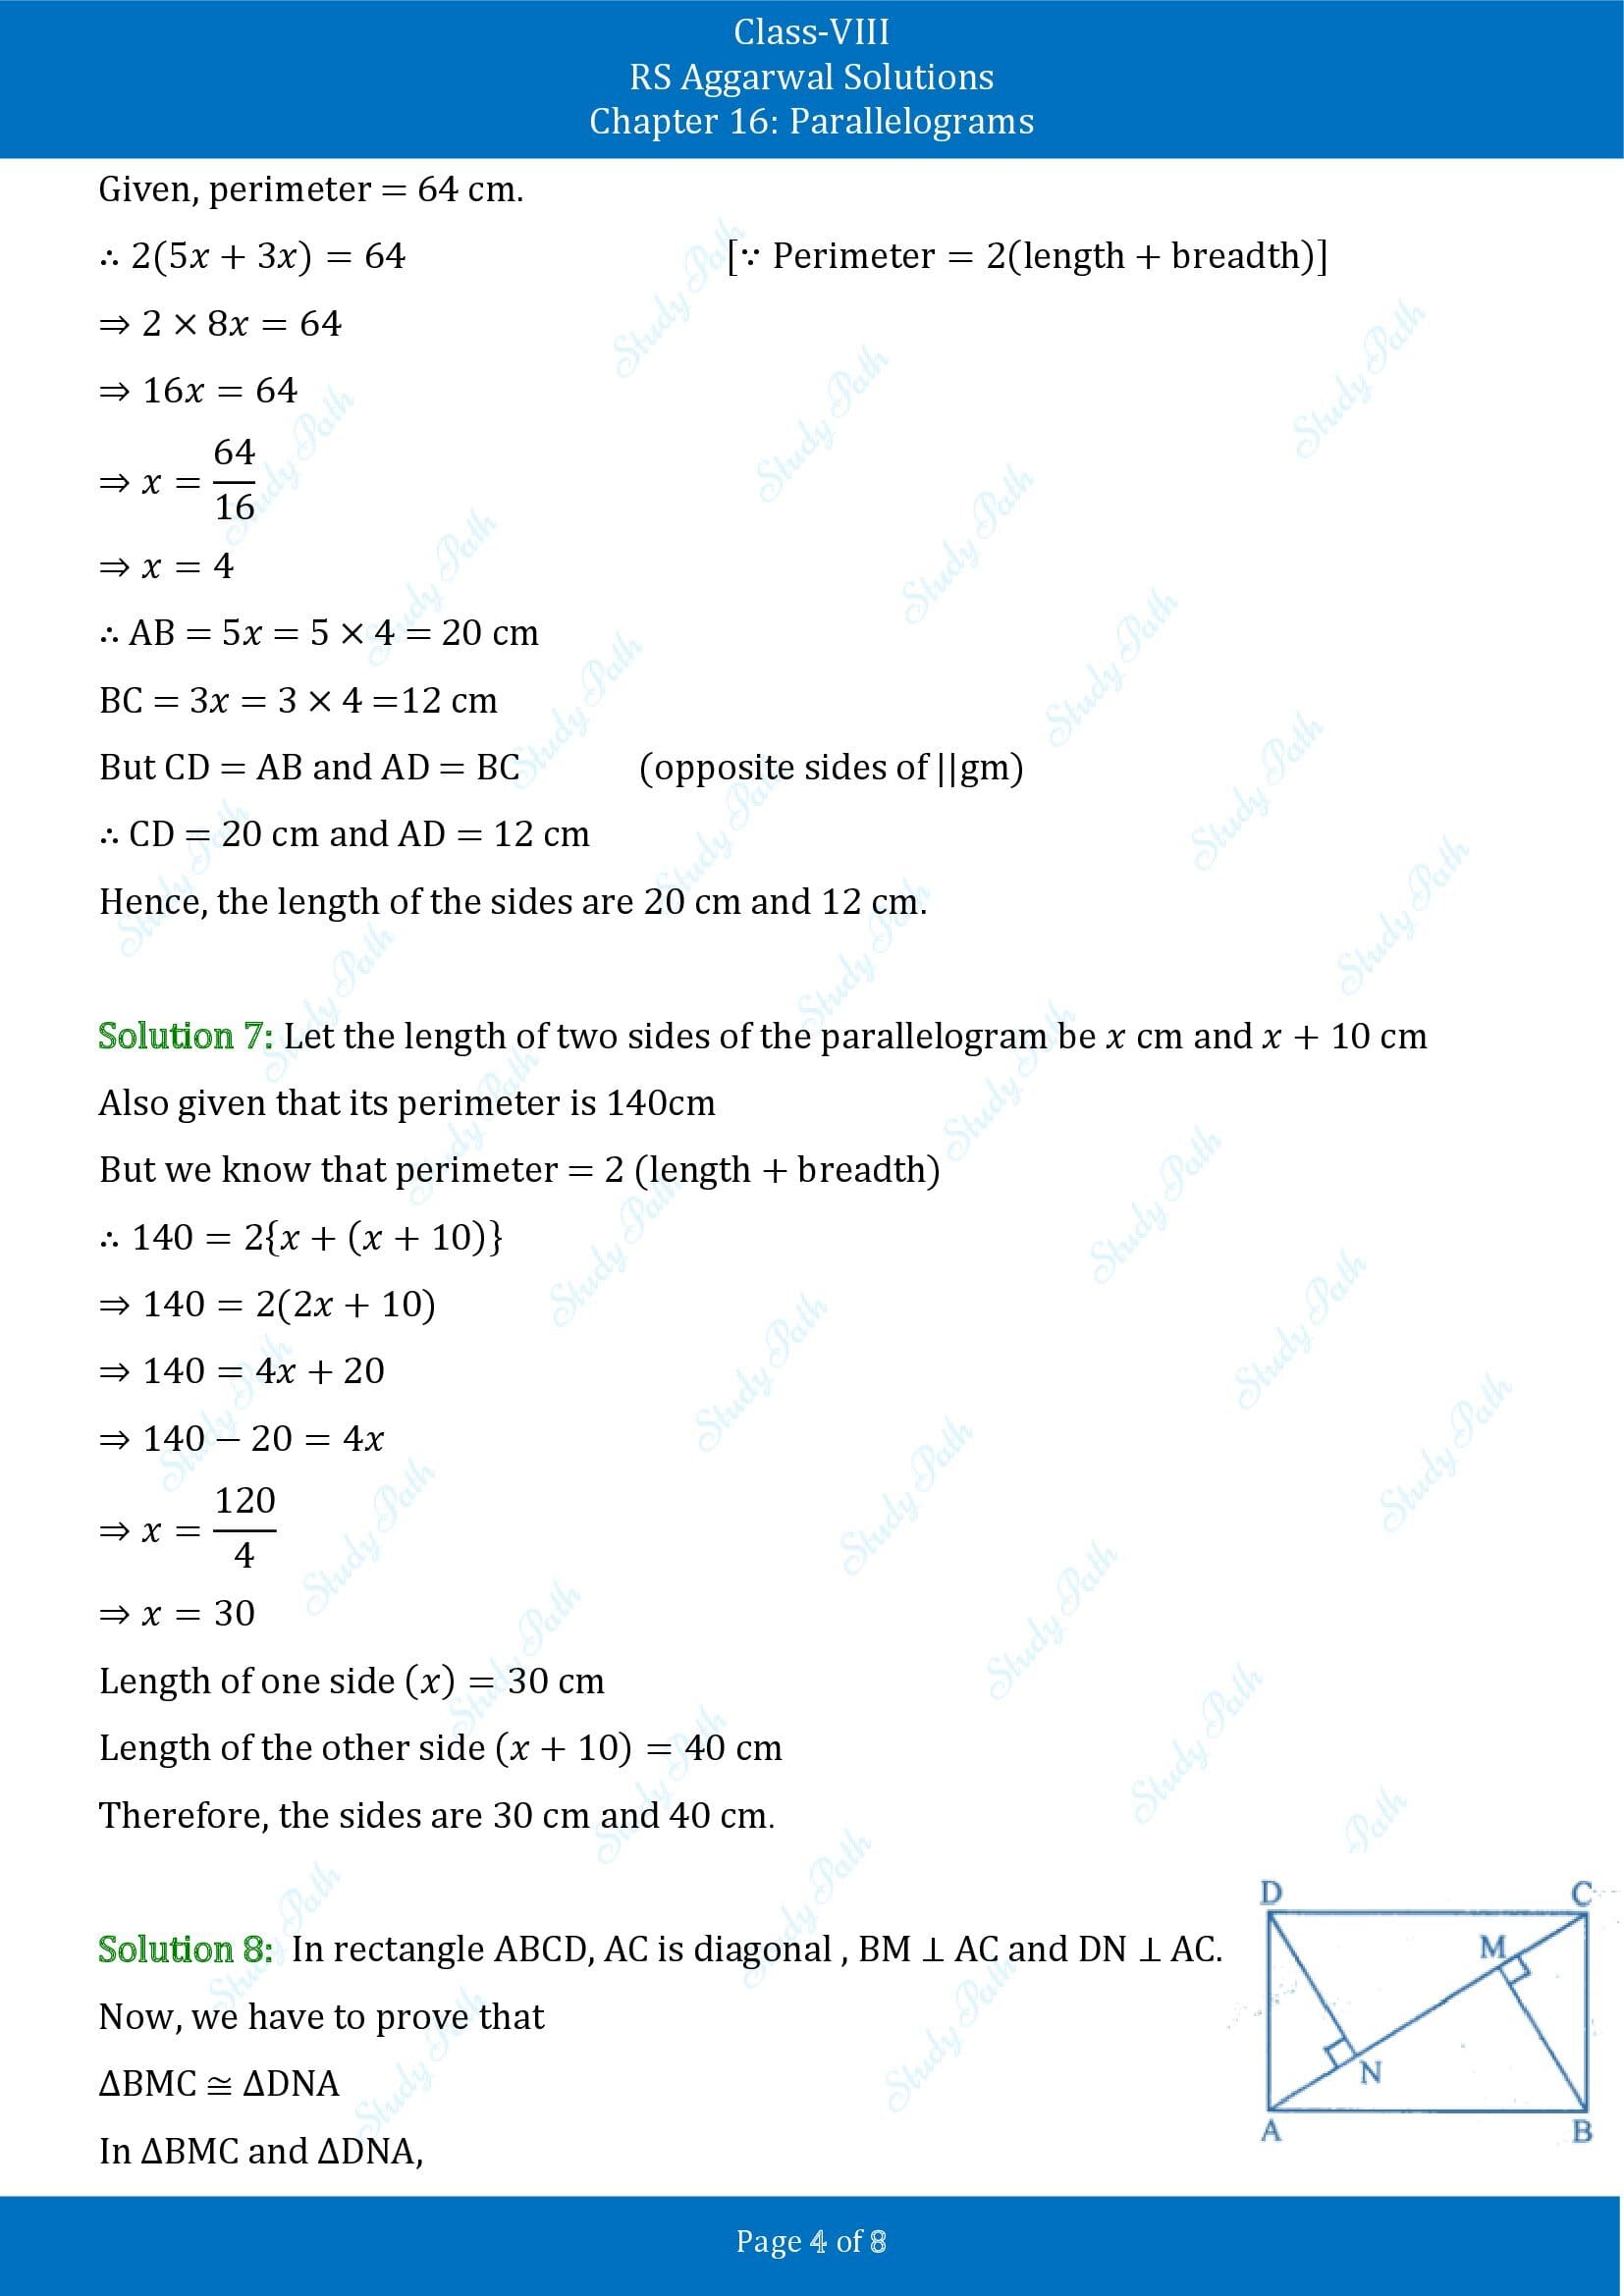 RS Aggarwal Solutions Class 8 Chapter 16 Parallelograms Exercise 16A 00004